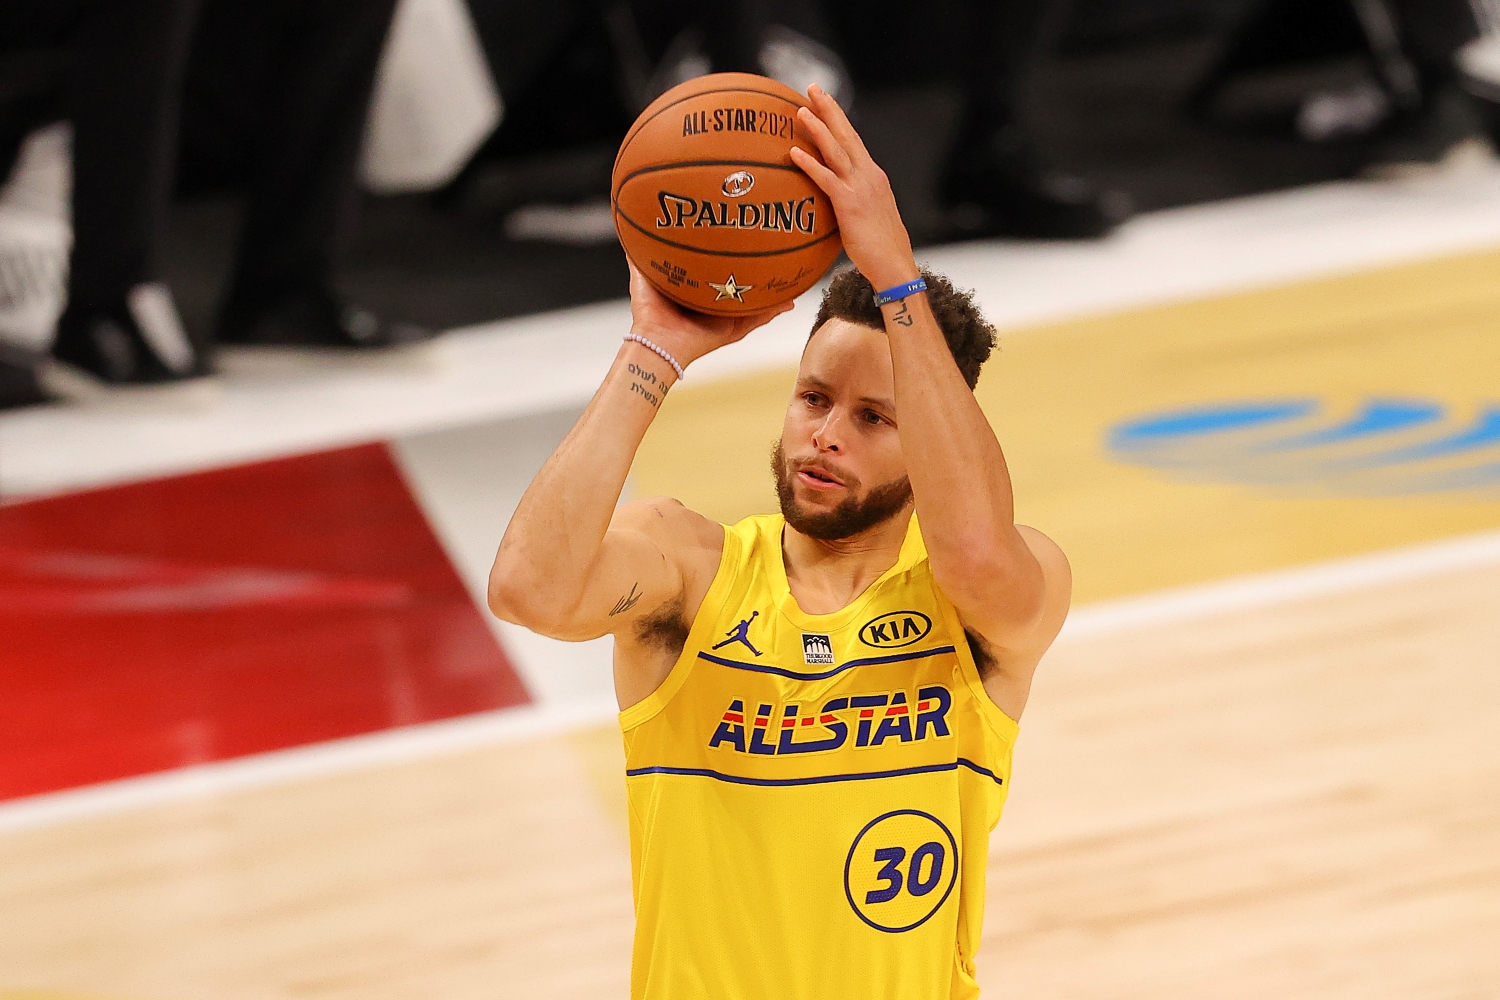 Stephen Curry attempts a 3-point shot during the 2021 NBA All-Star Game in Atlanta.